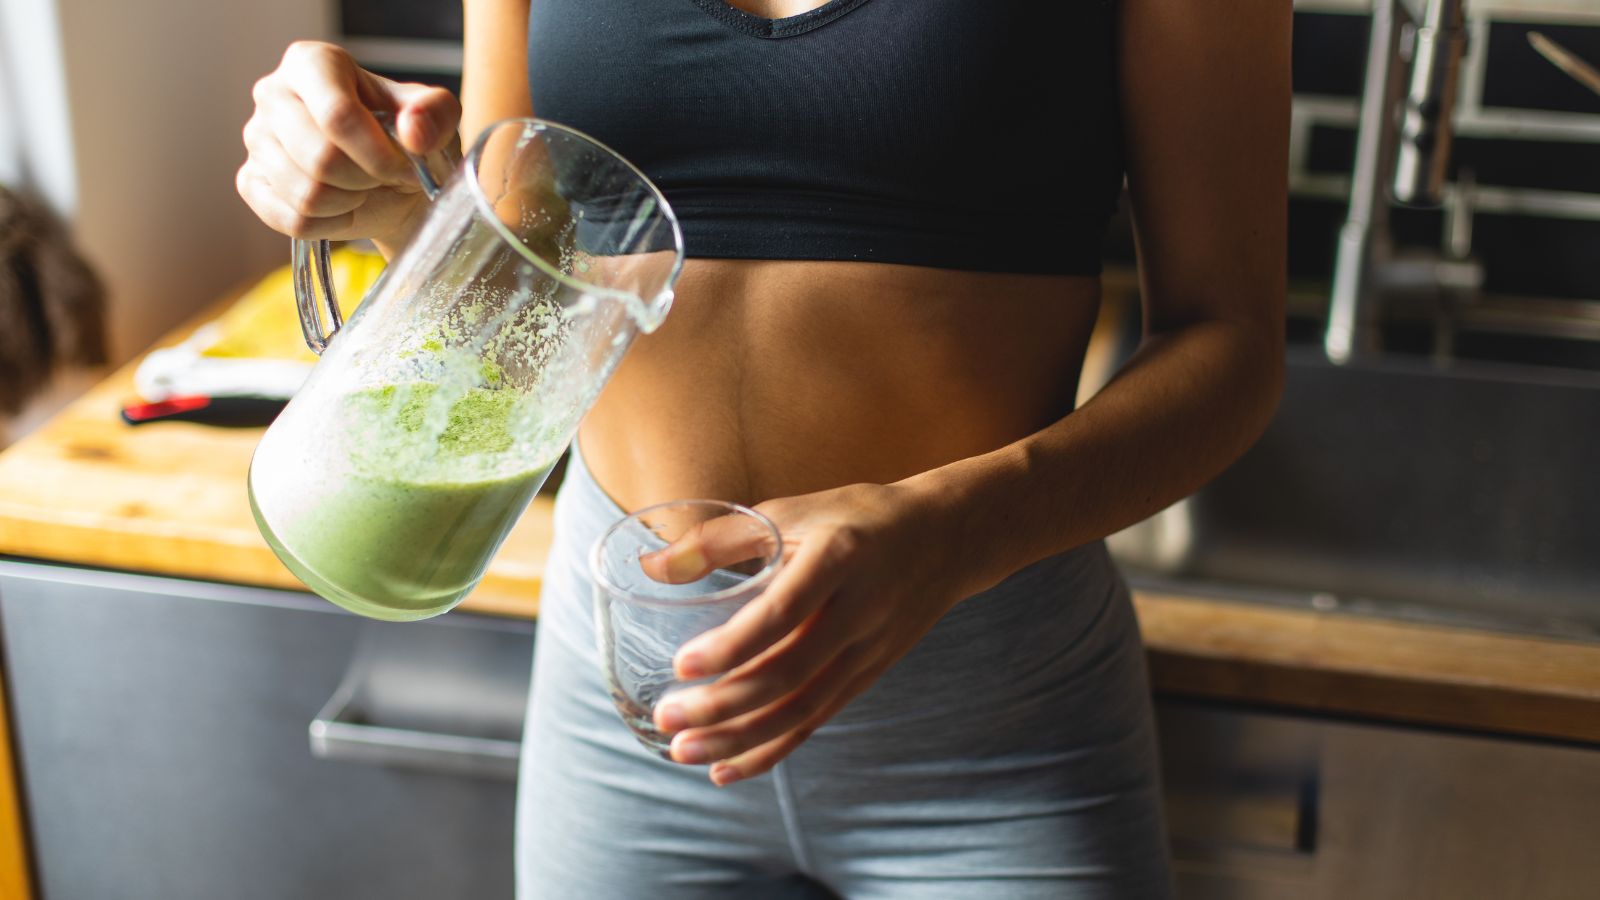 The Brain Food - Green Smoothies for brain health